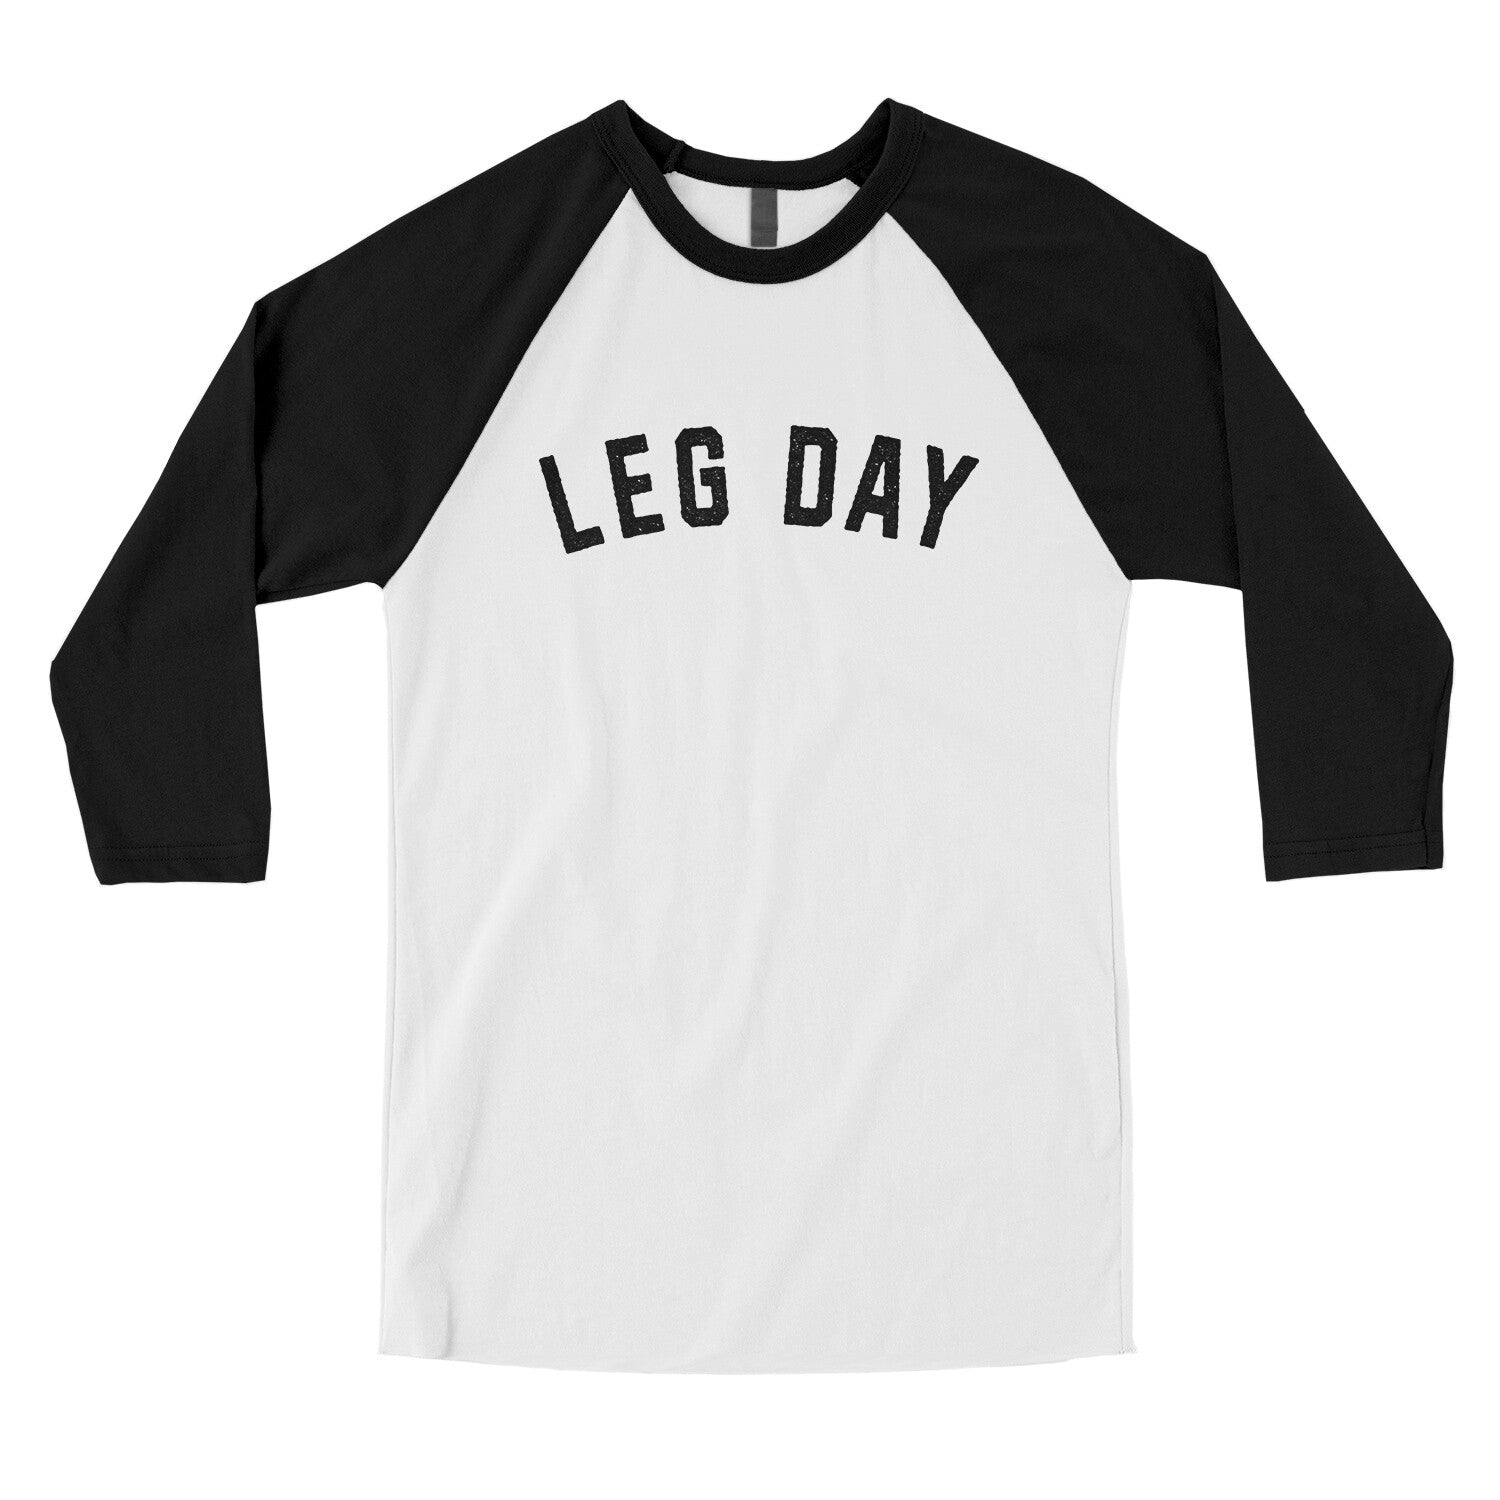 Leg Day in White with Black Color